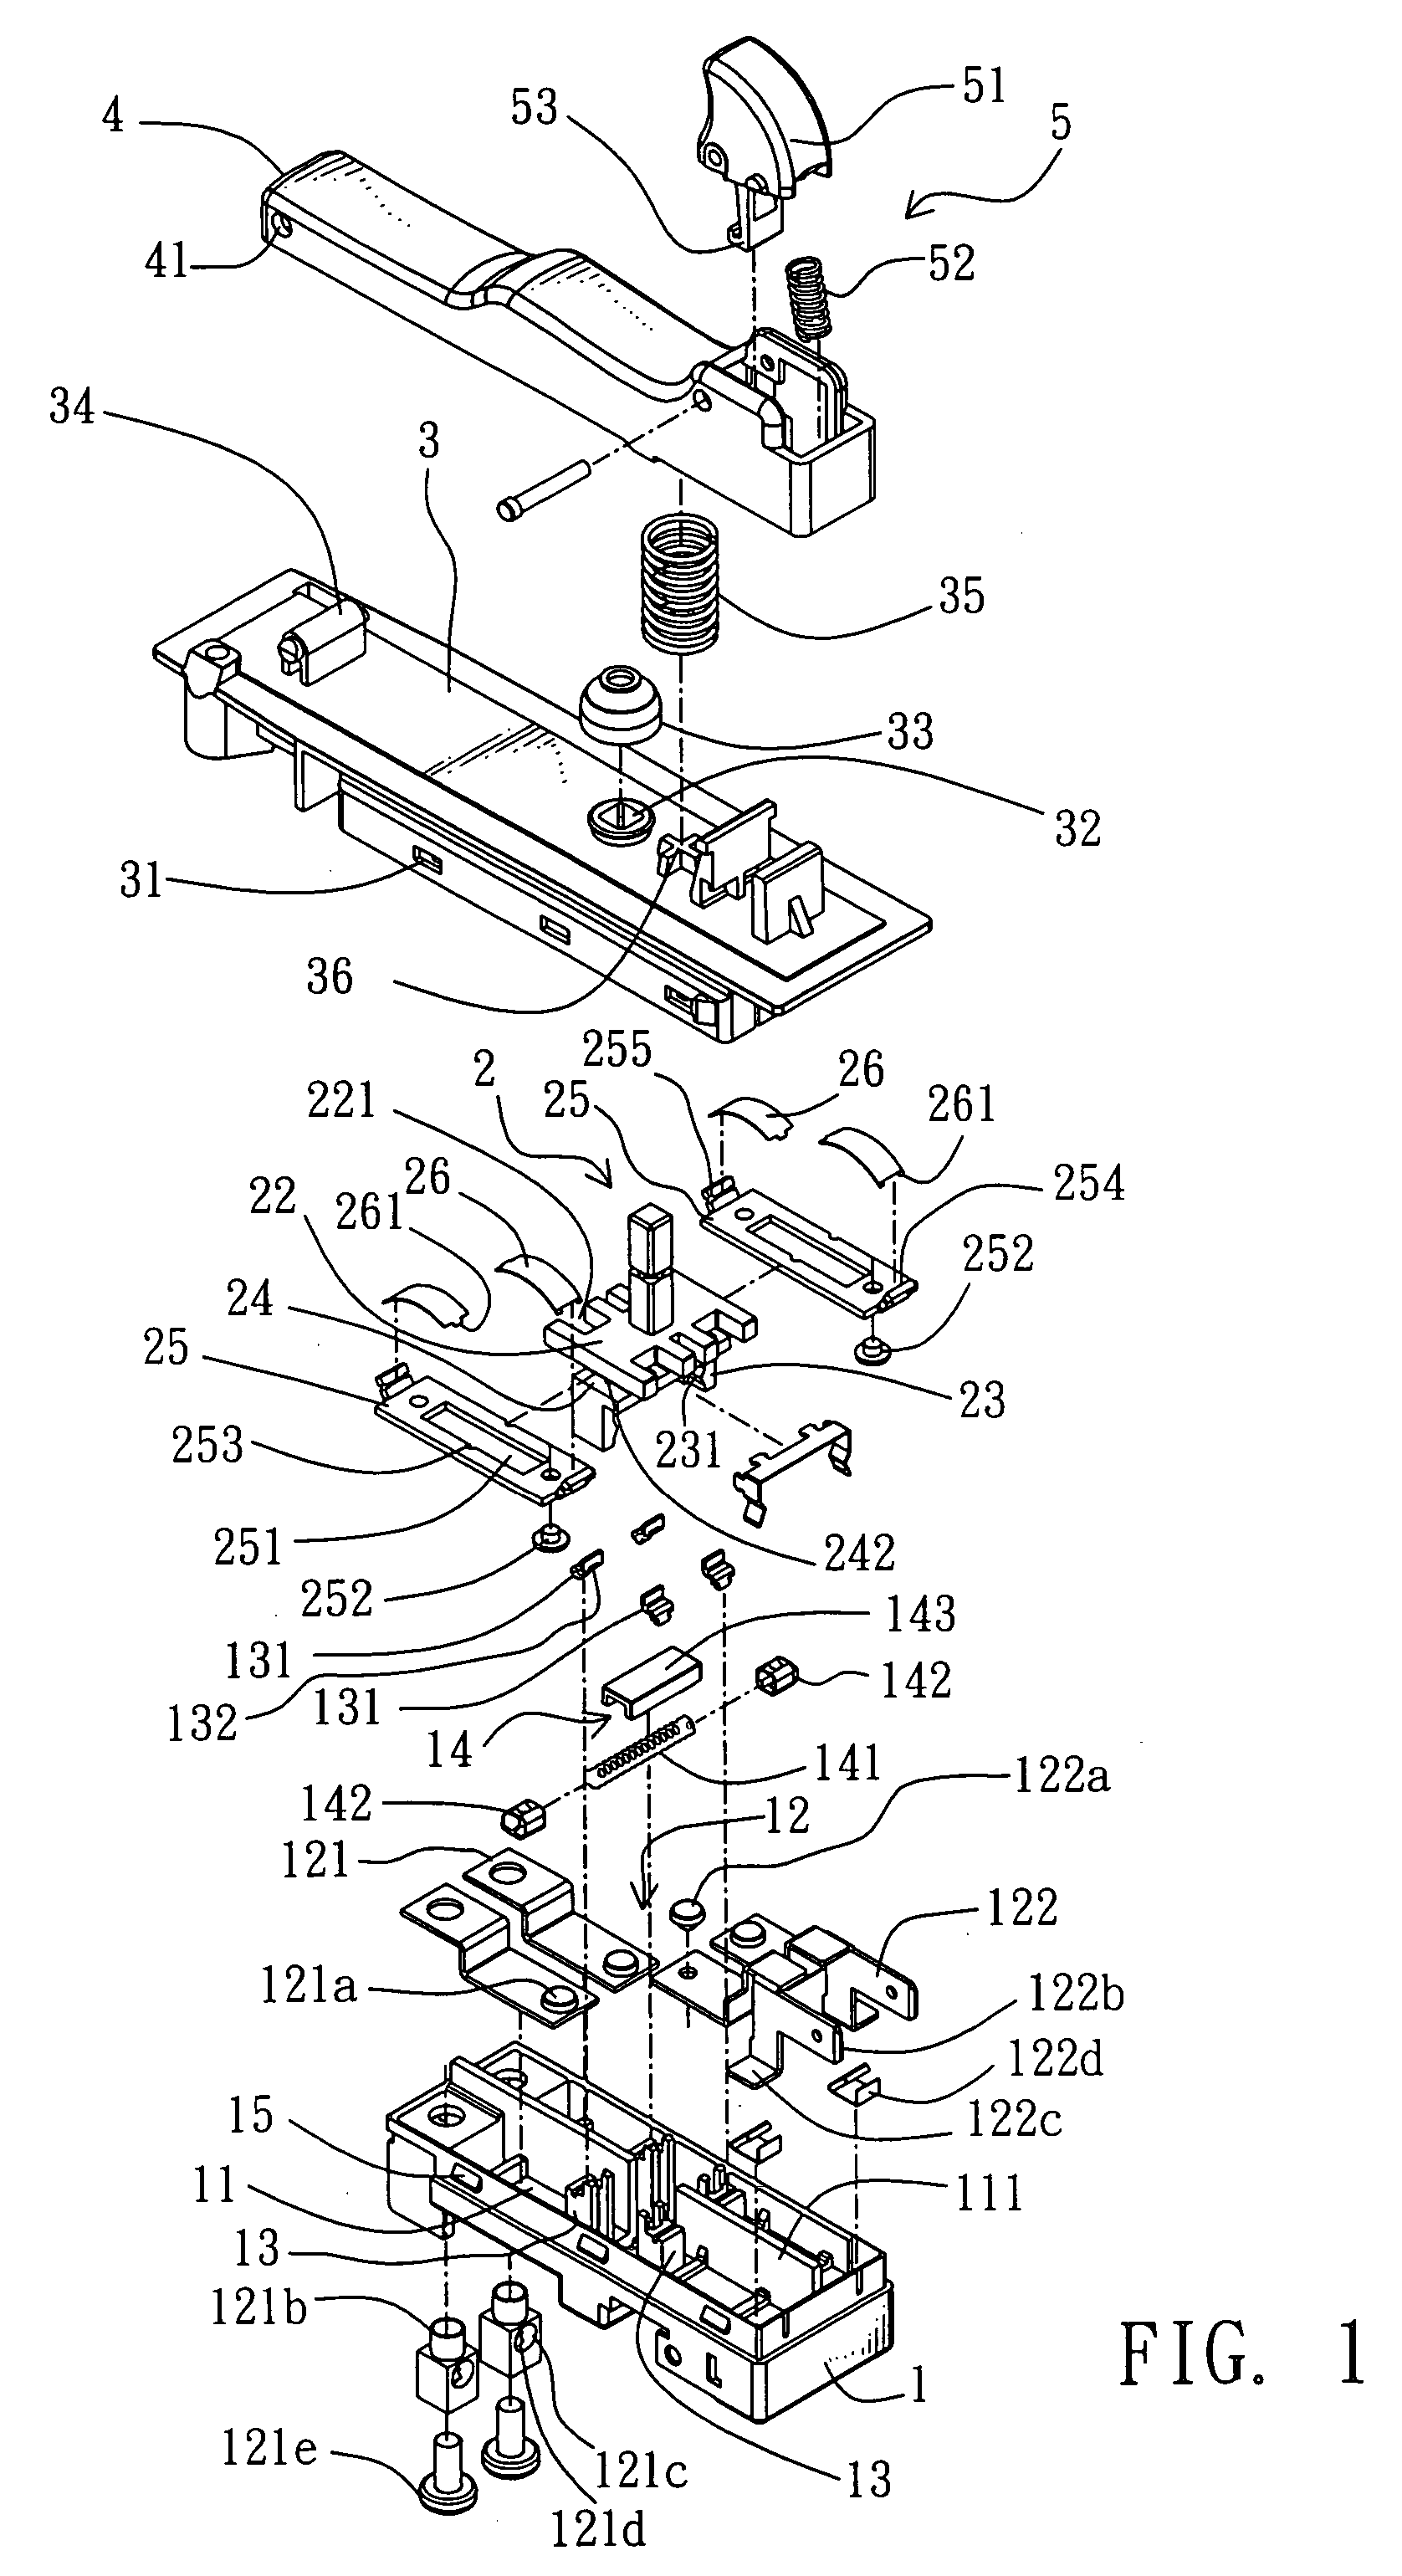 Press switch having a force-to-detach function